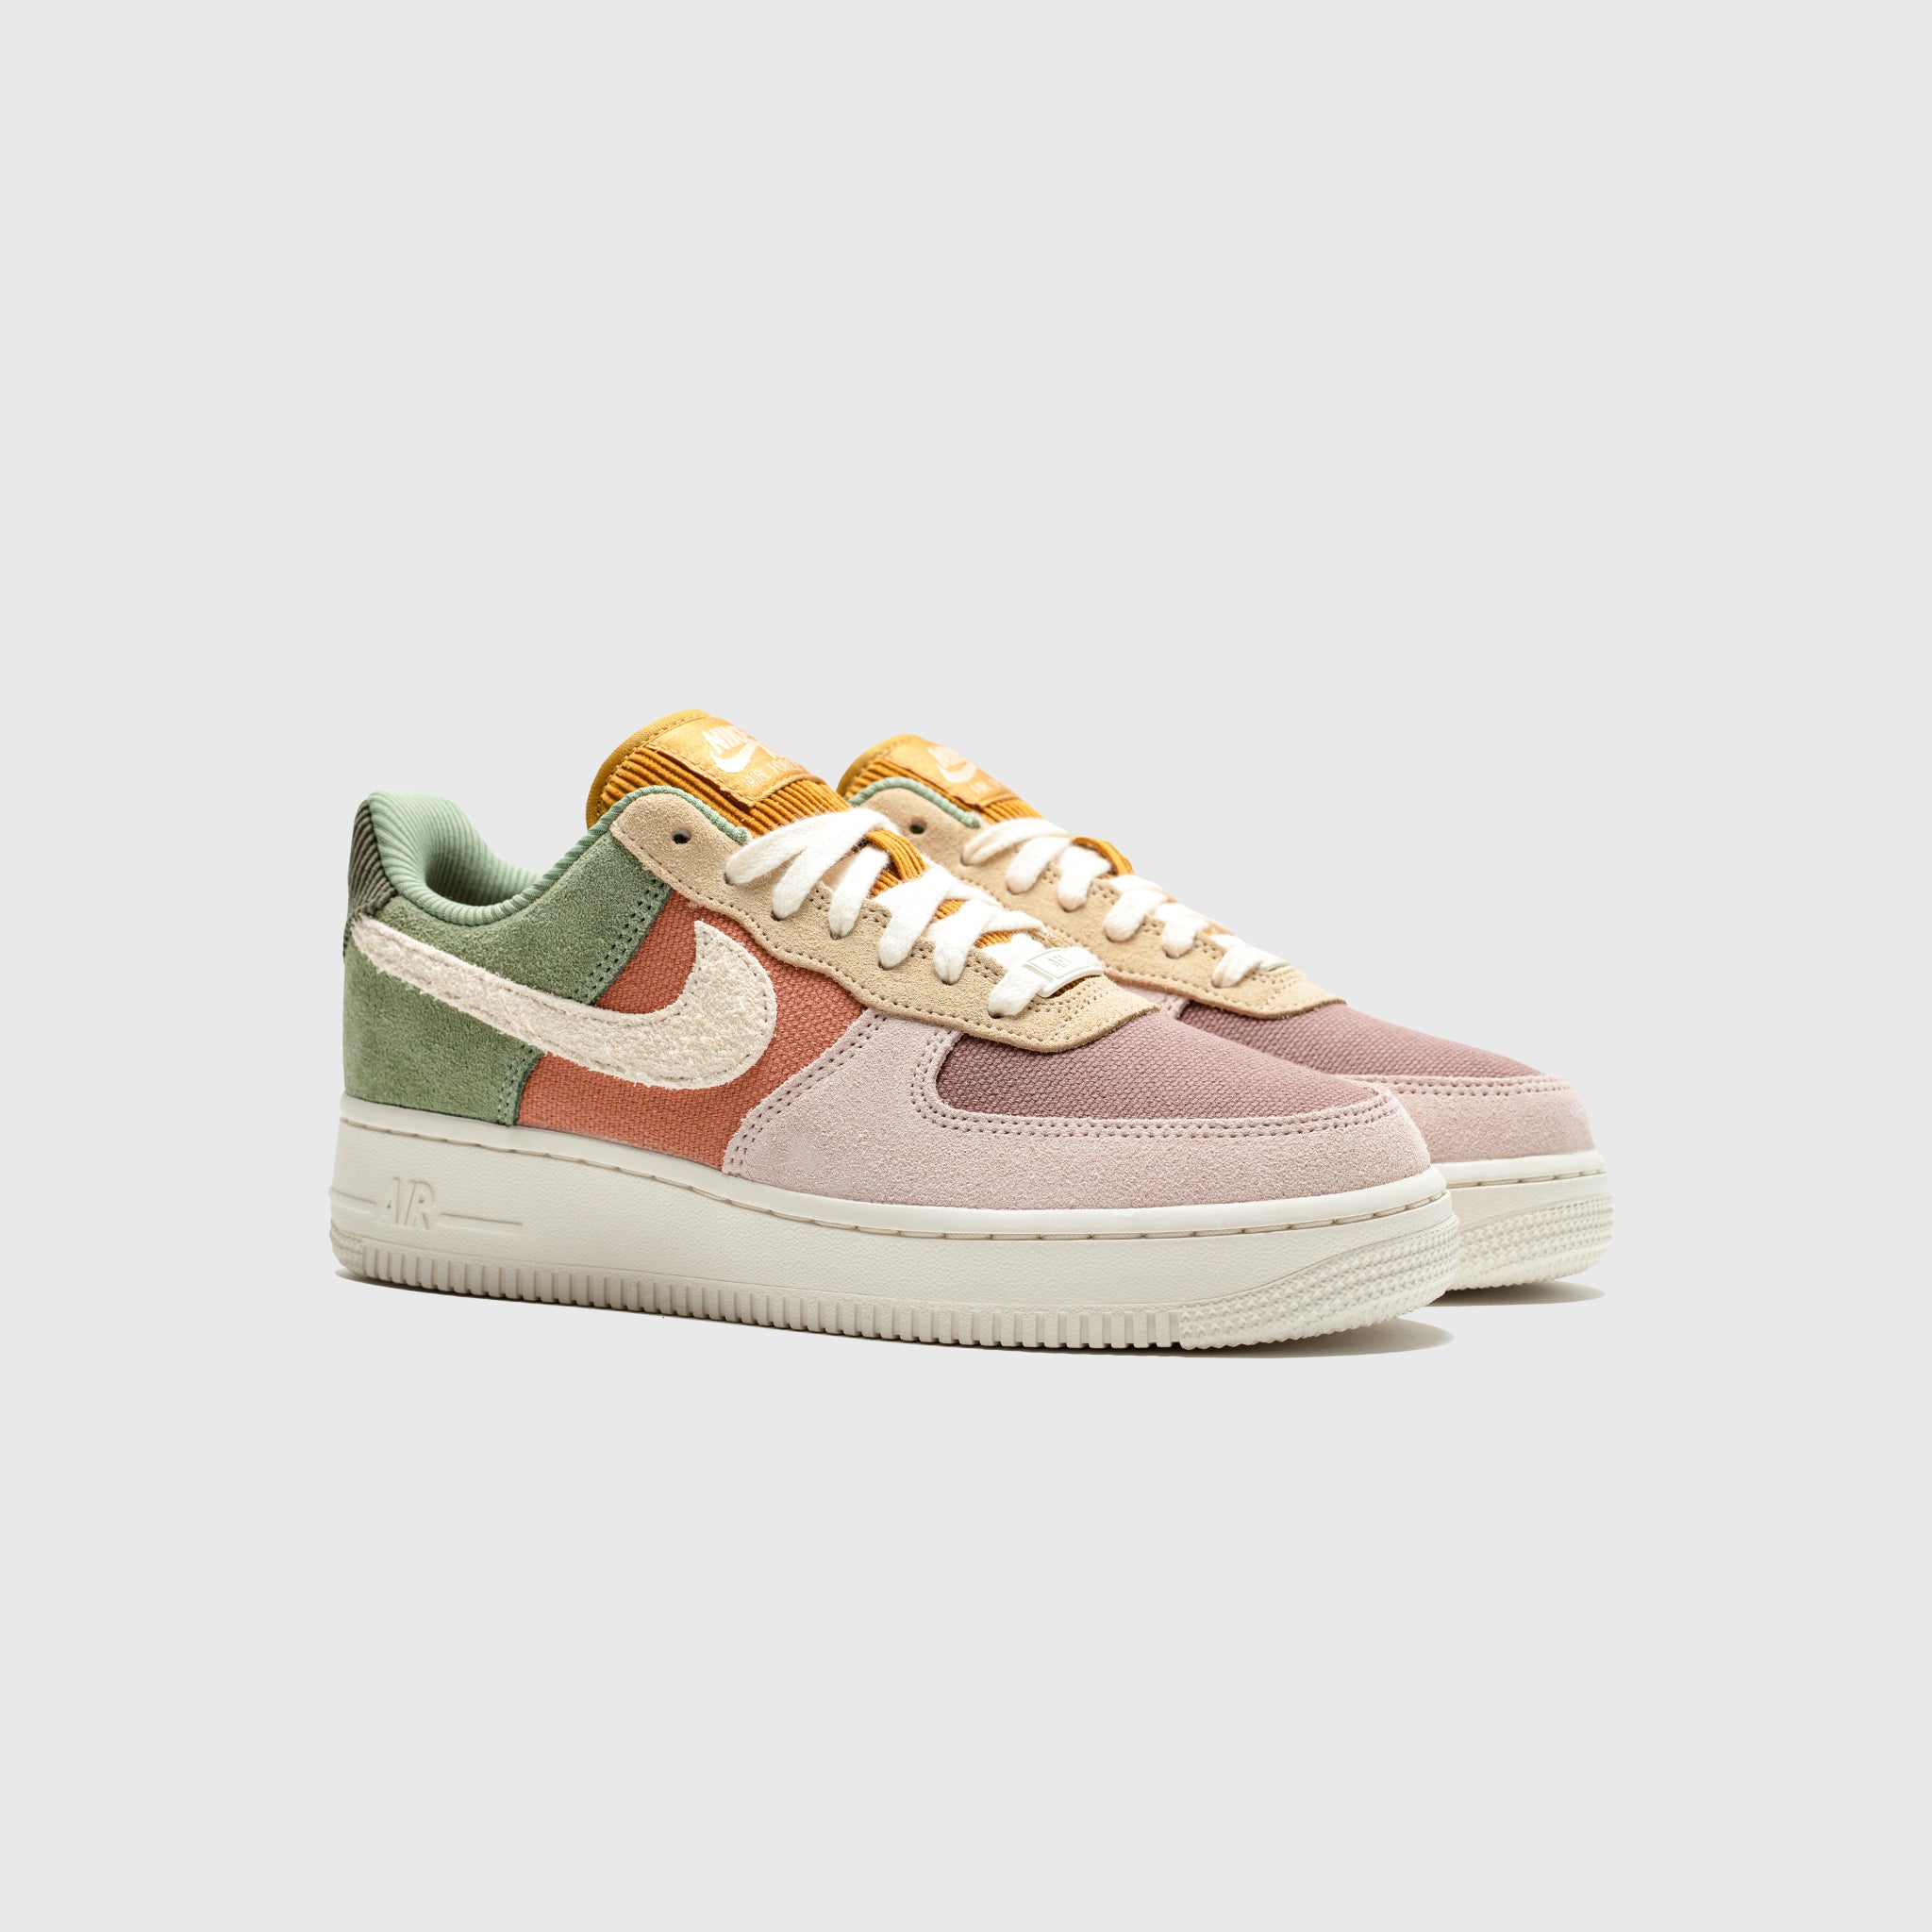 WMNS AIR FORCE 1 '07 LX " OIL GREEN & PALE IVORY"